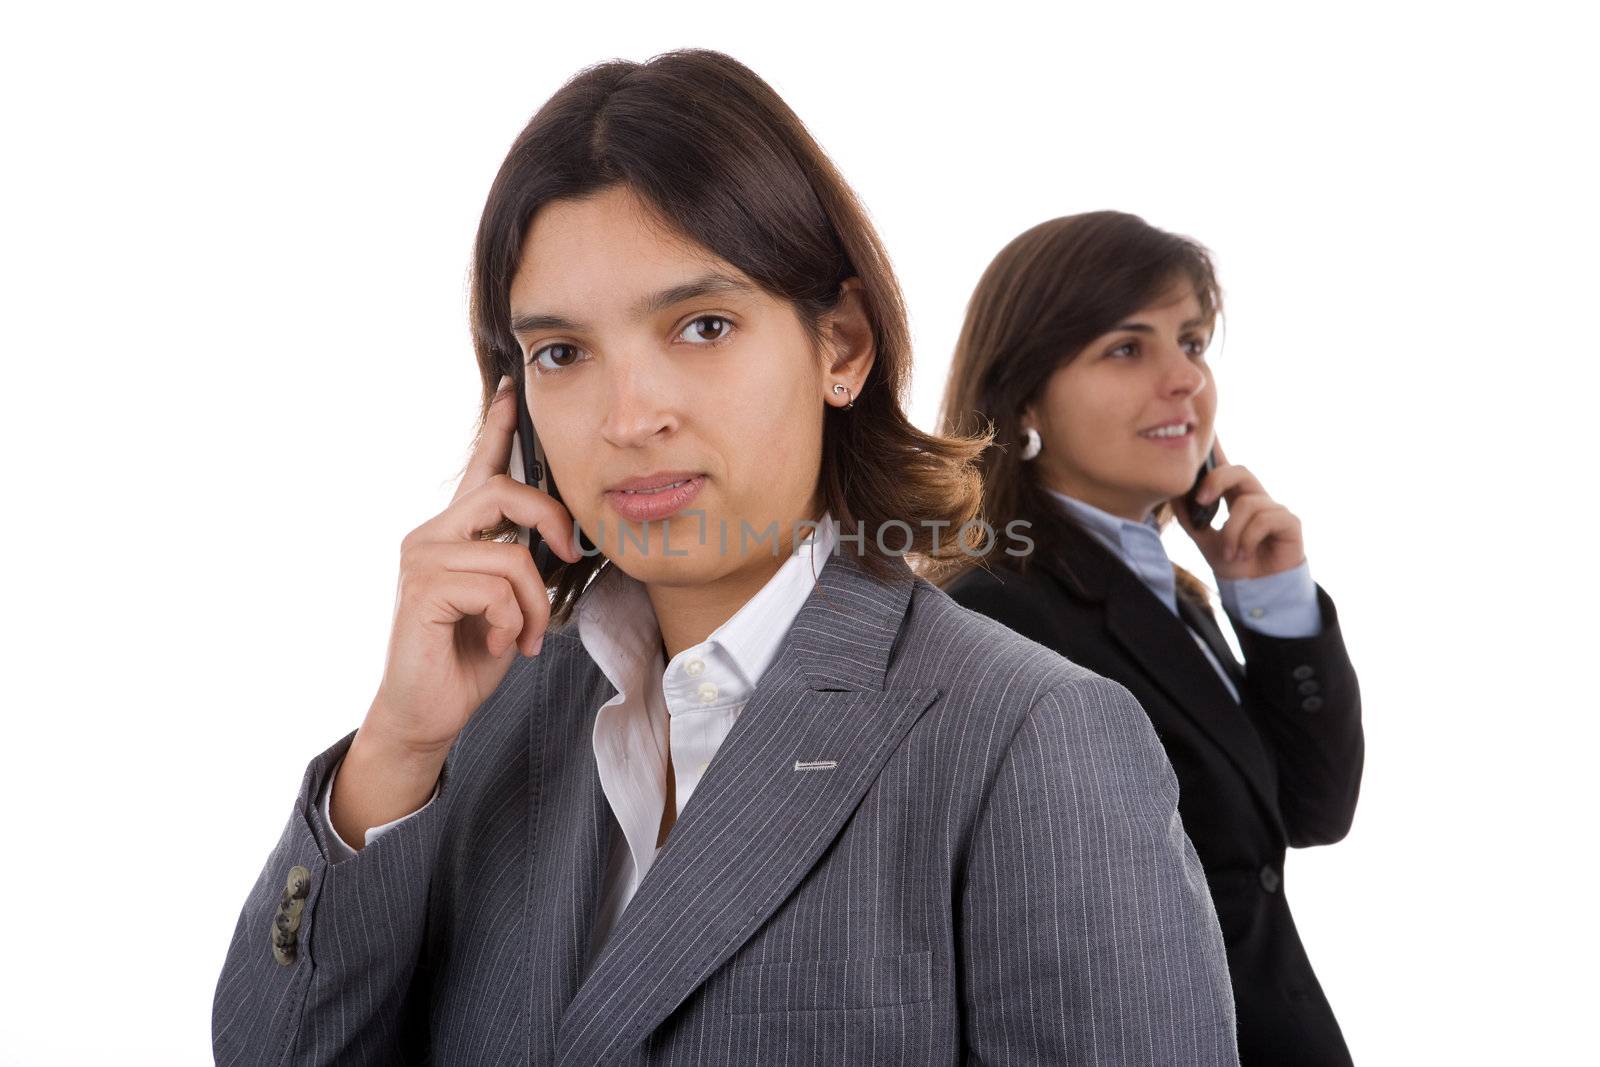 two businesswoman holding mobile phones. focus in on the front model.